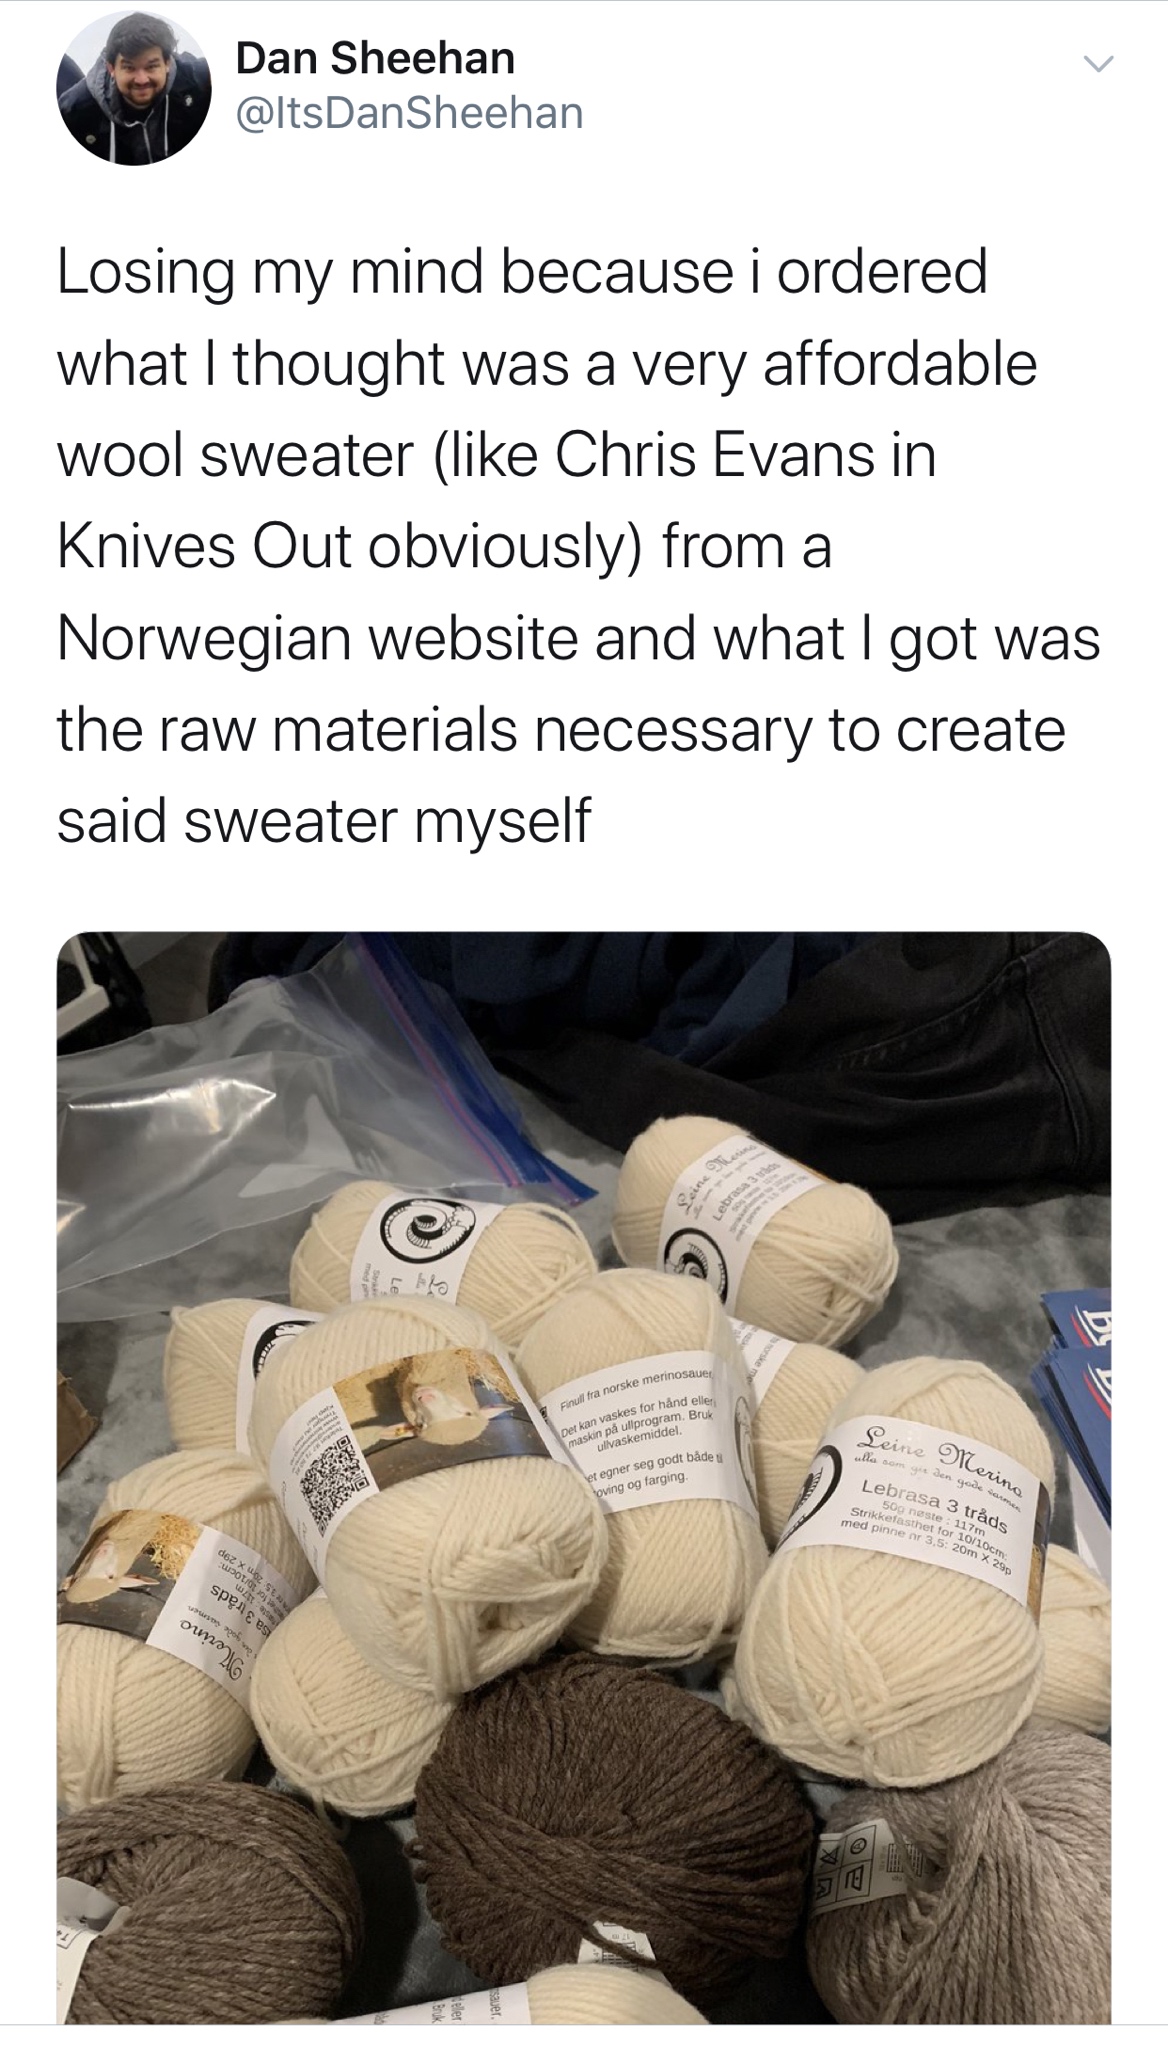 wool - Dan Sheehan Losing my mind because i ordered what I thought was a very affordable wool sweater Chris Evans in Knives Out obviously from a Norwegian website and what I got was the raw materials necessary to create said sweater myself